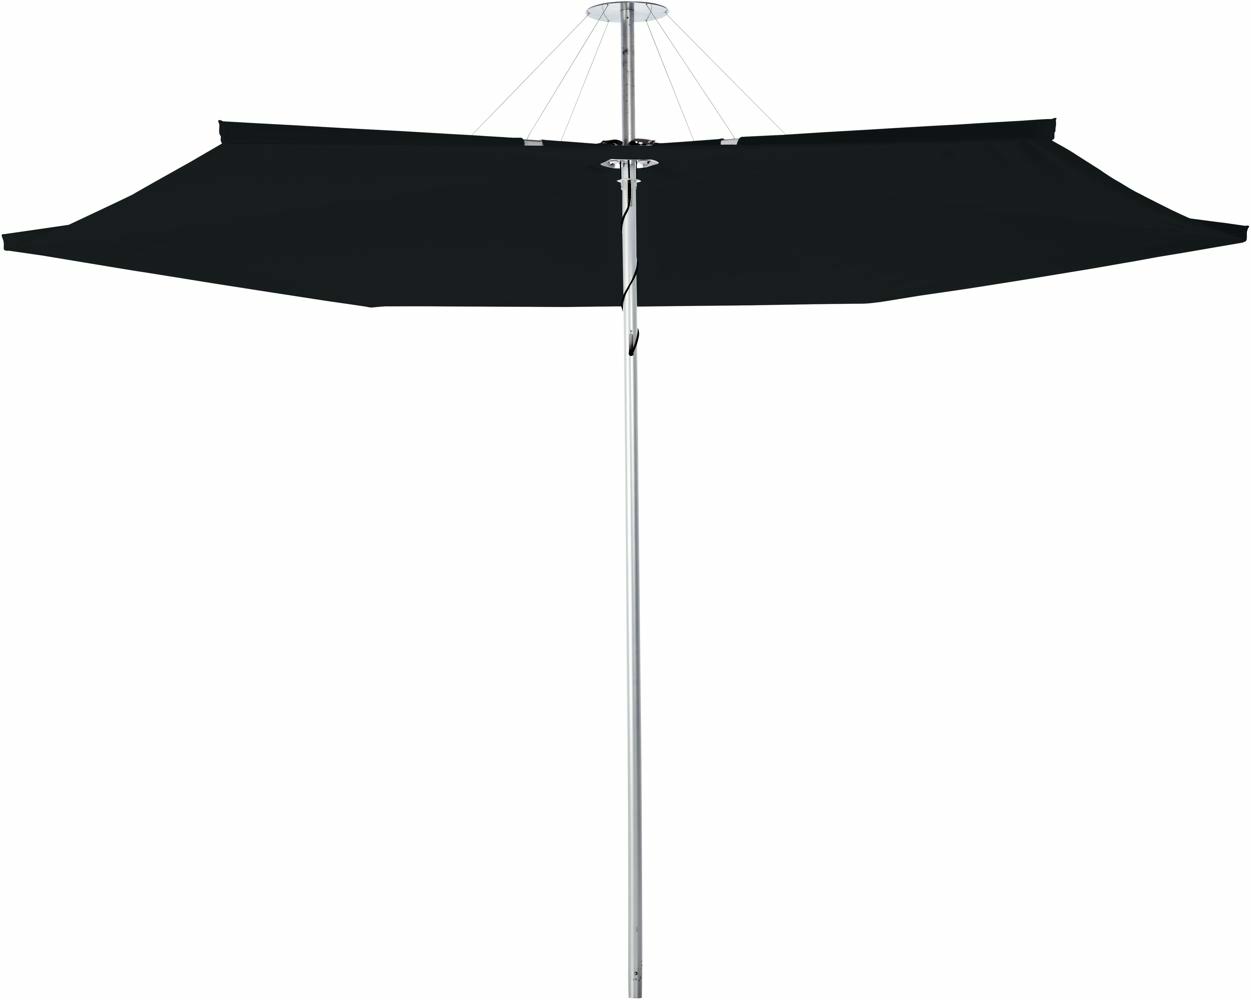 Infina canopy round 3 m in colour Black